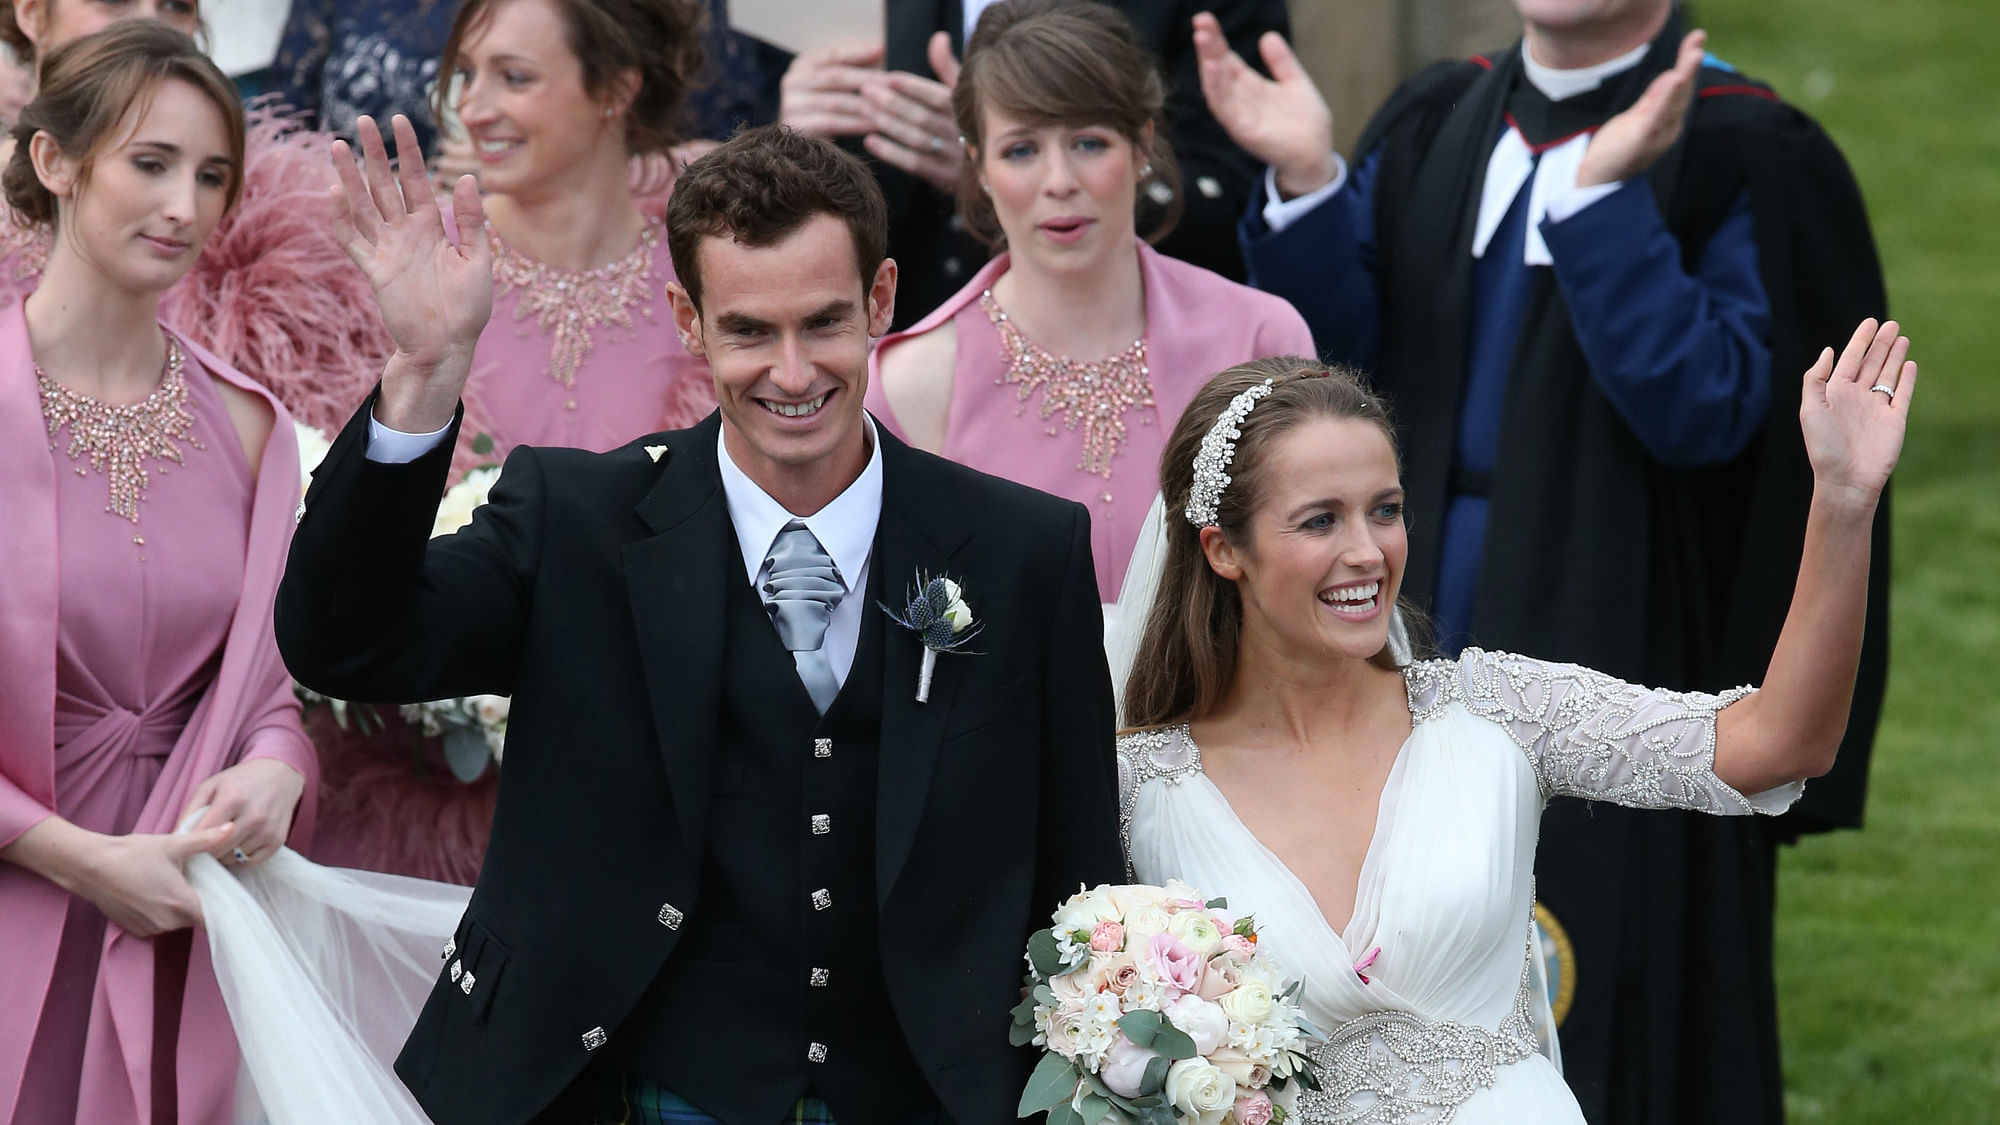 Andy Murray to follow complete Scottish custom for wedding with Kim Sears |  India.com